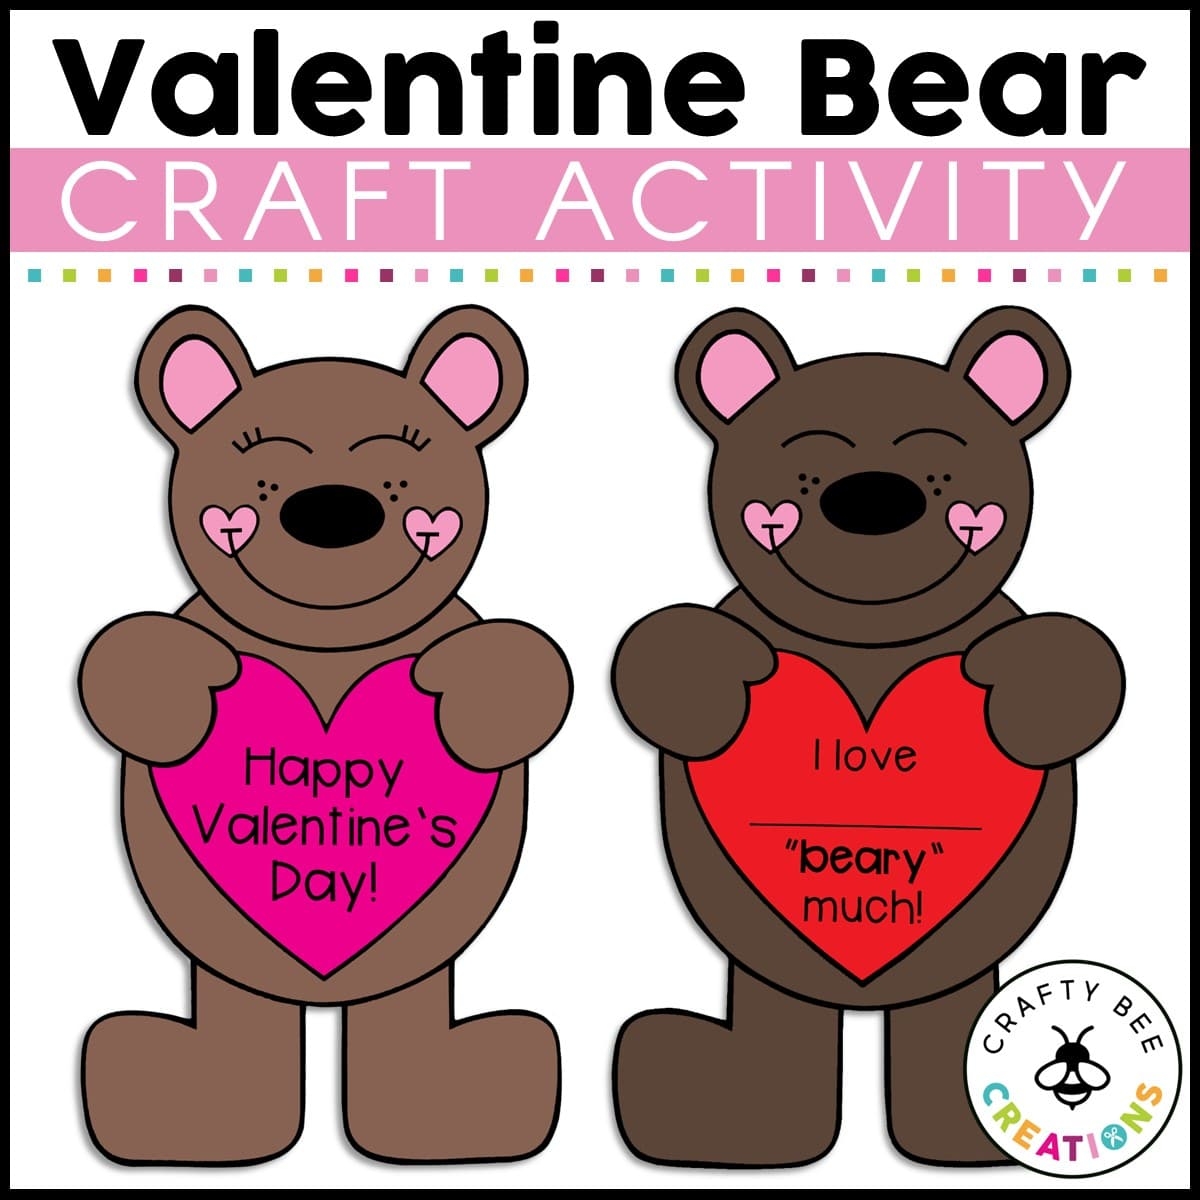 I Love You Beary Much Valentine Bear Craft Activity Crafty Bee Creations